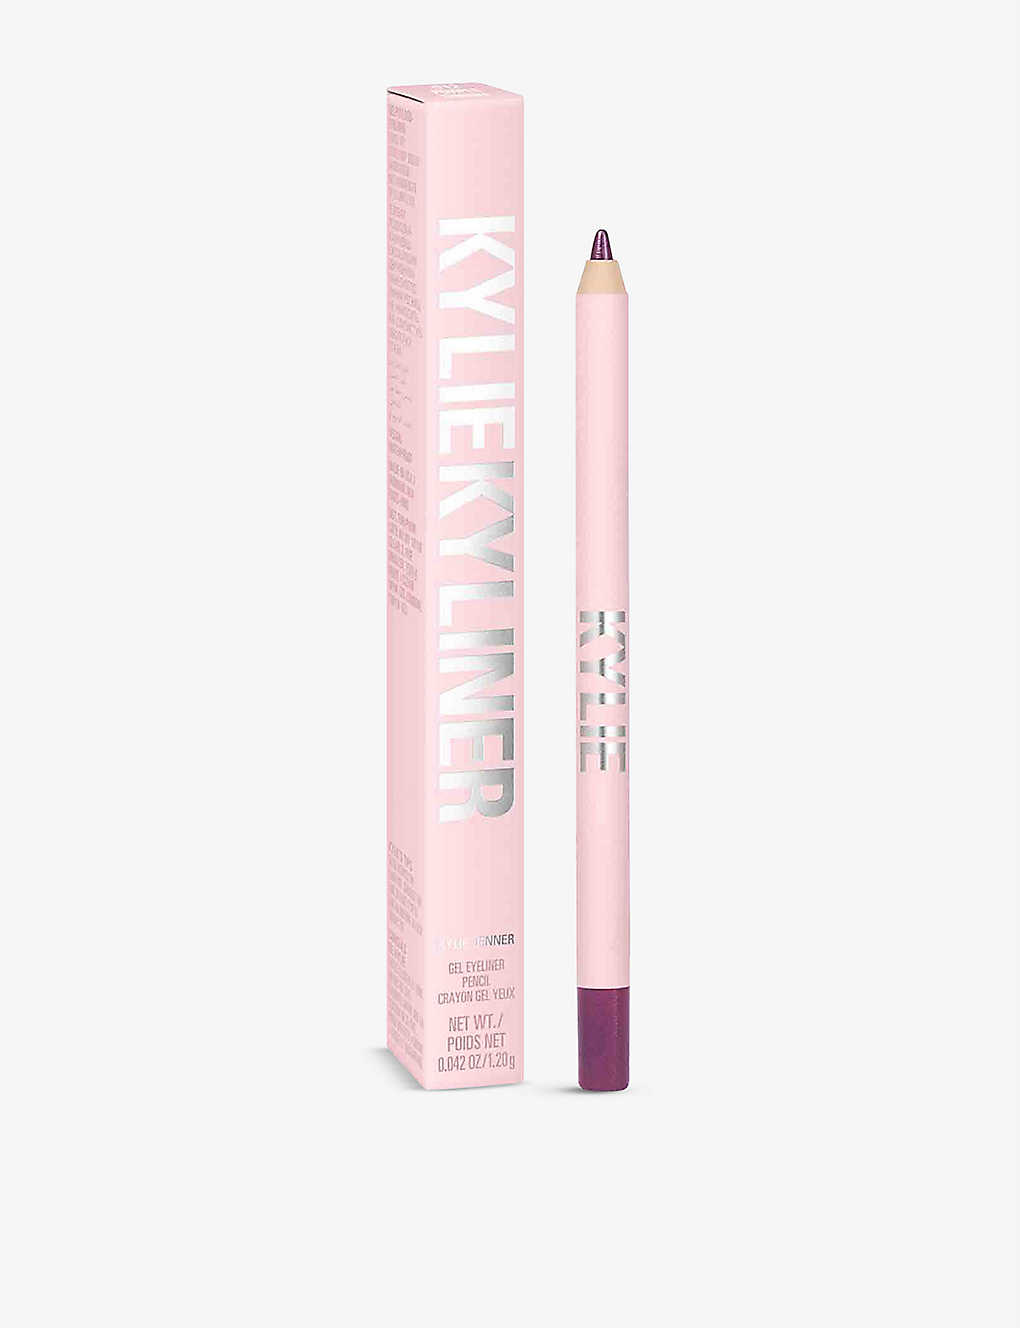 Kylie By Kylie Jenner Kyliner Gel Pencil 4.25g In 012 Shimmery Purple